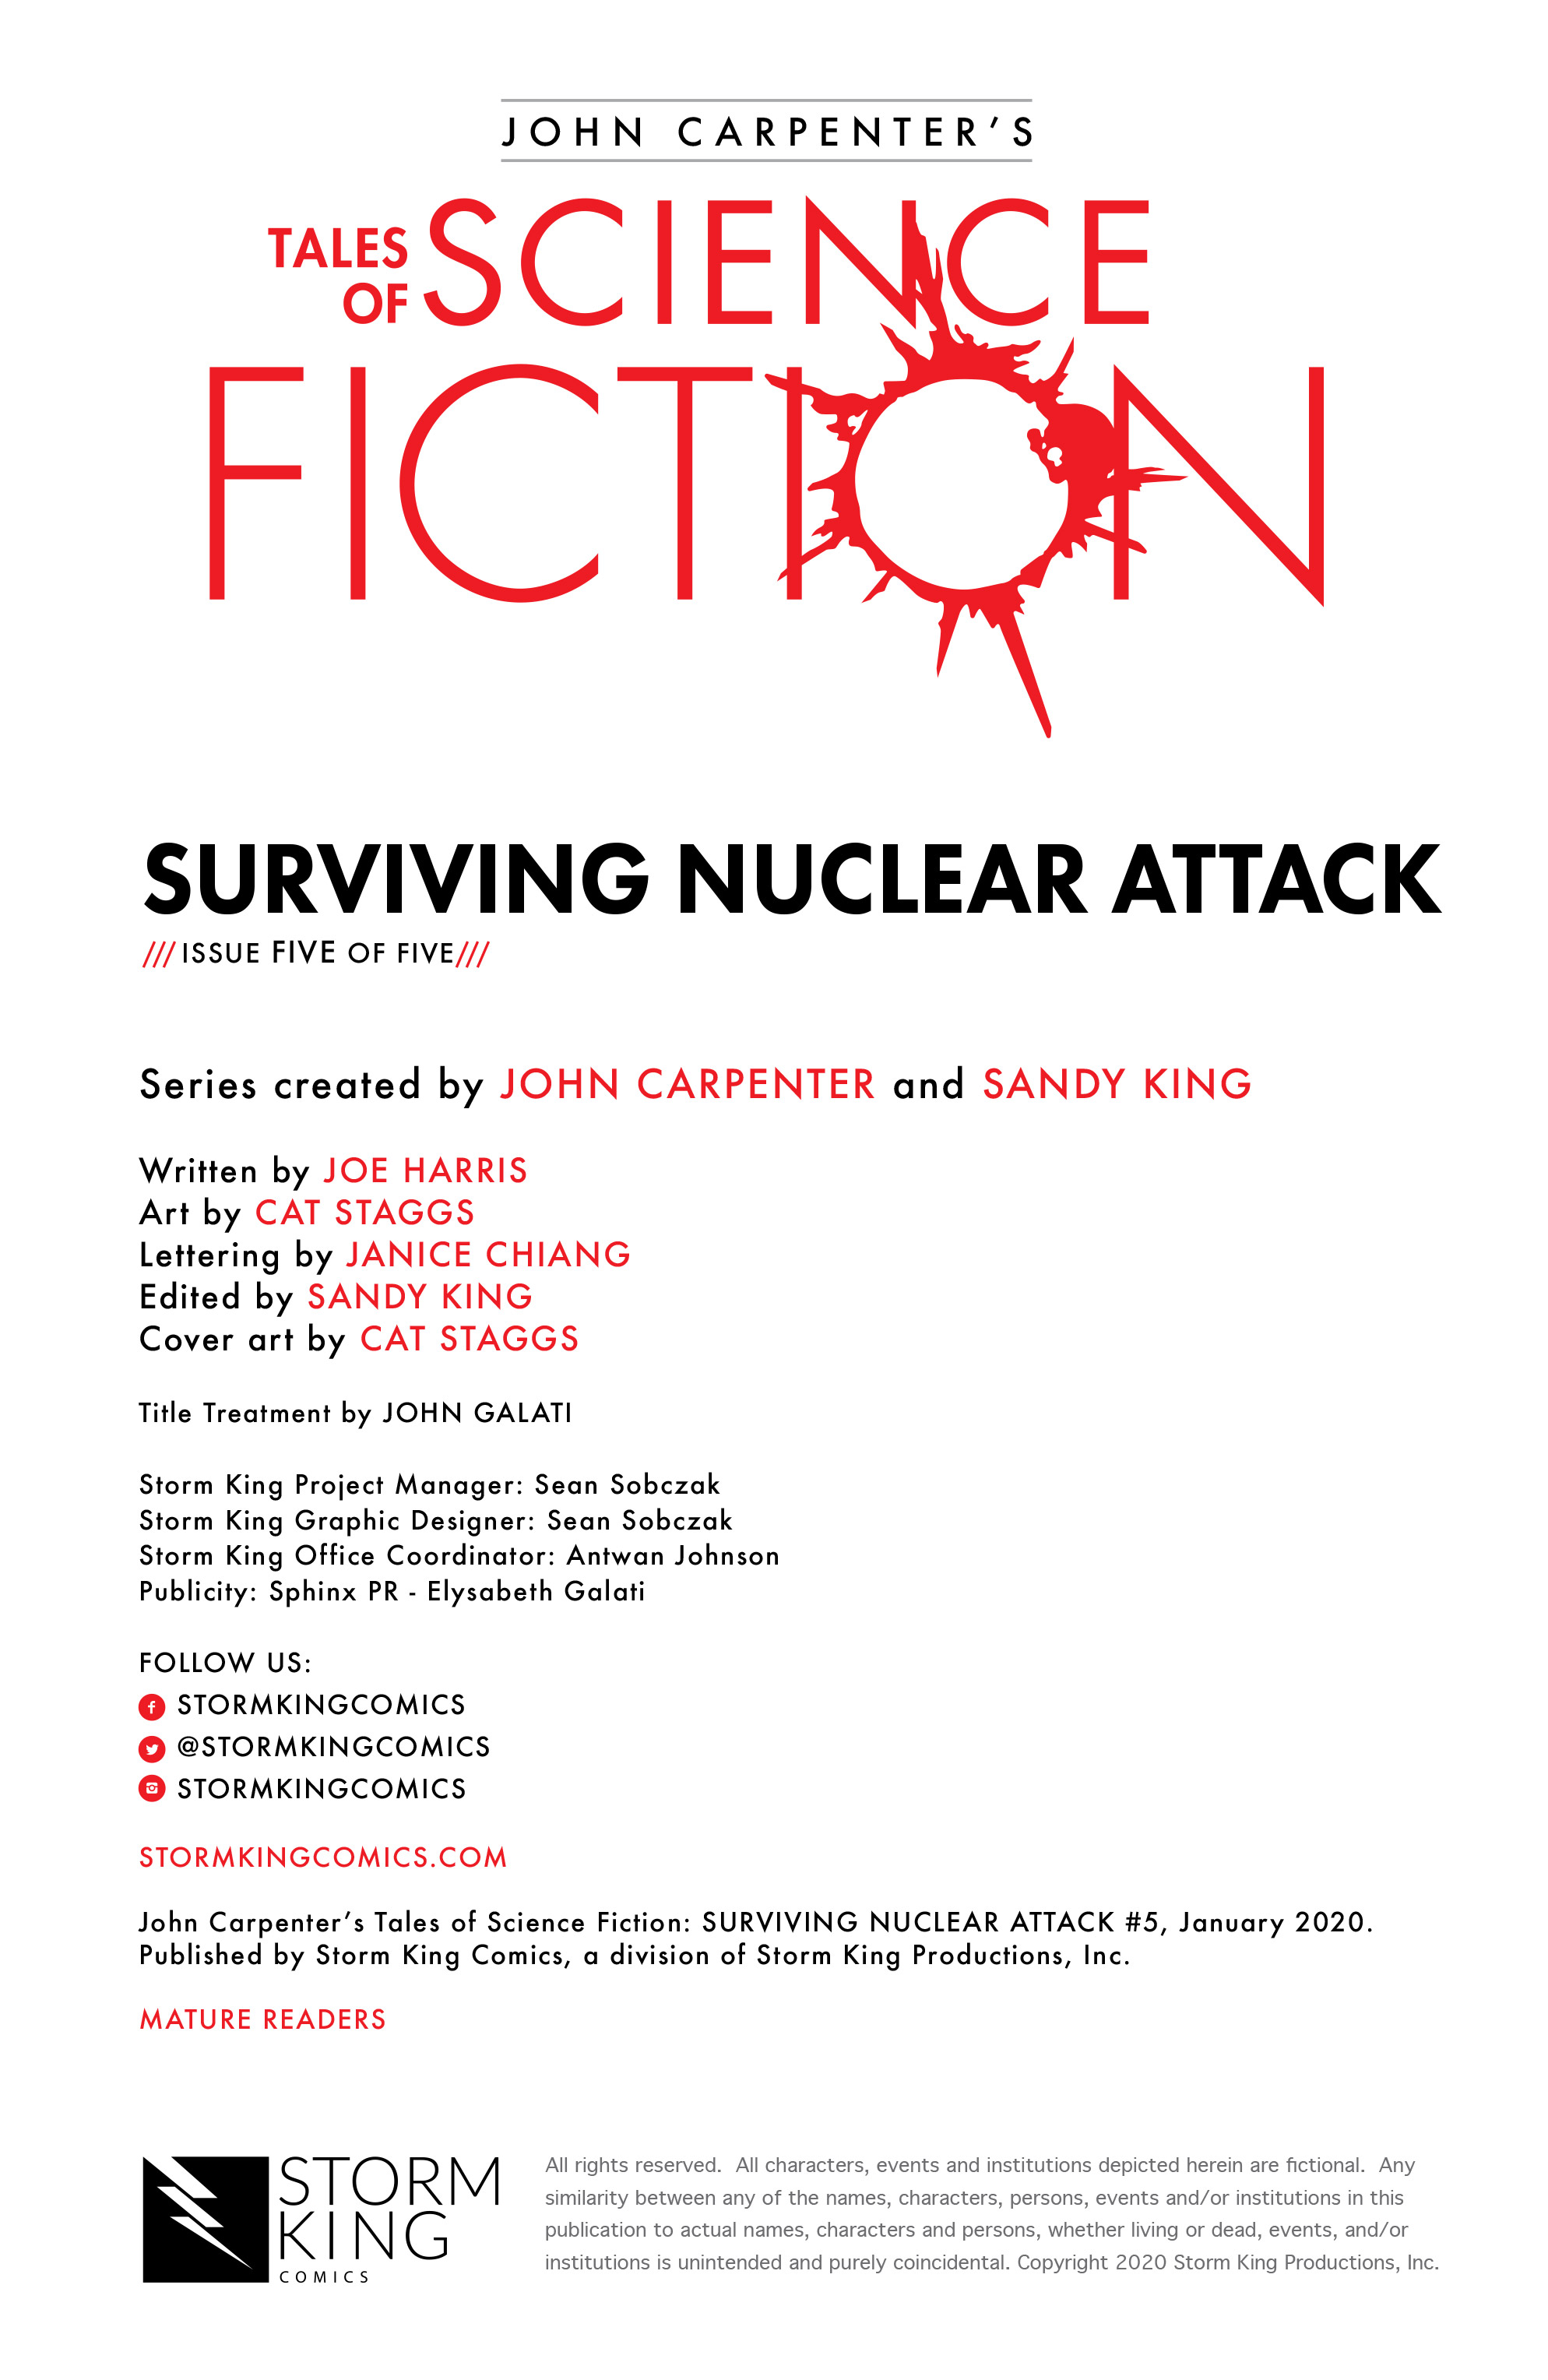 Read online John Carpenter's Tales of Science Fiction: Surviving Nuclear Attack comic -  Issue #5 - 2